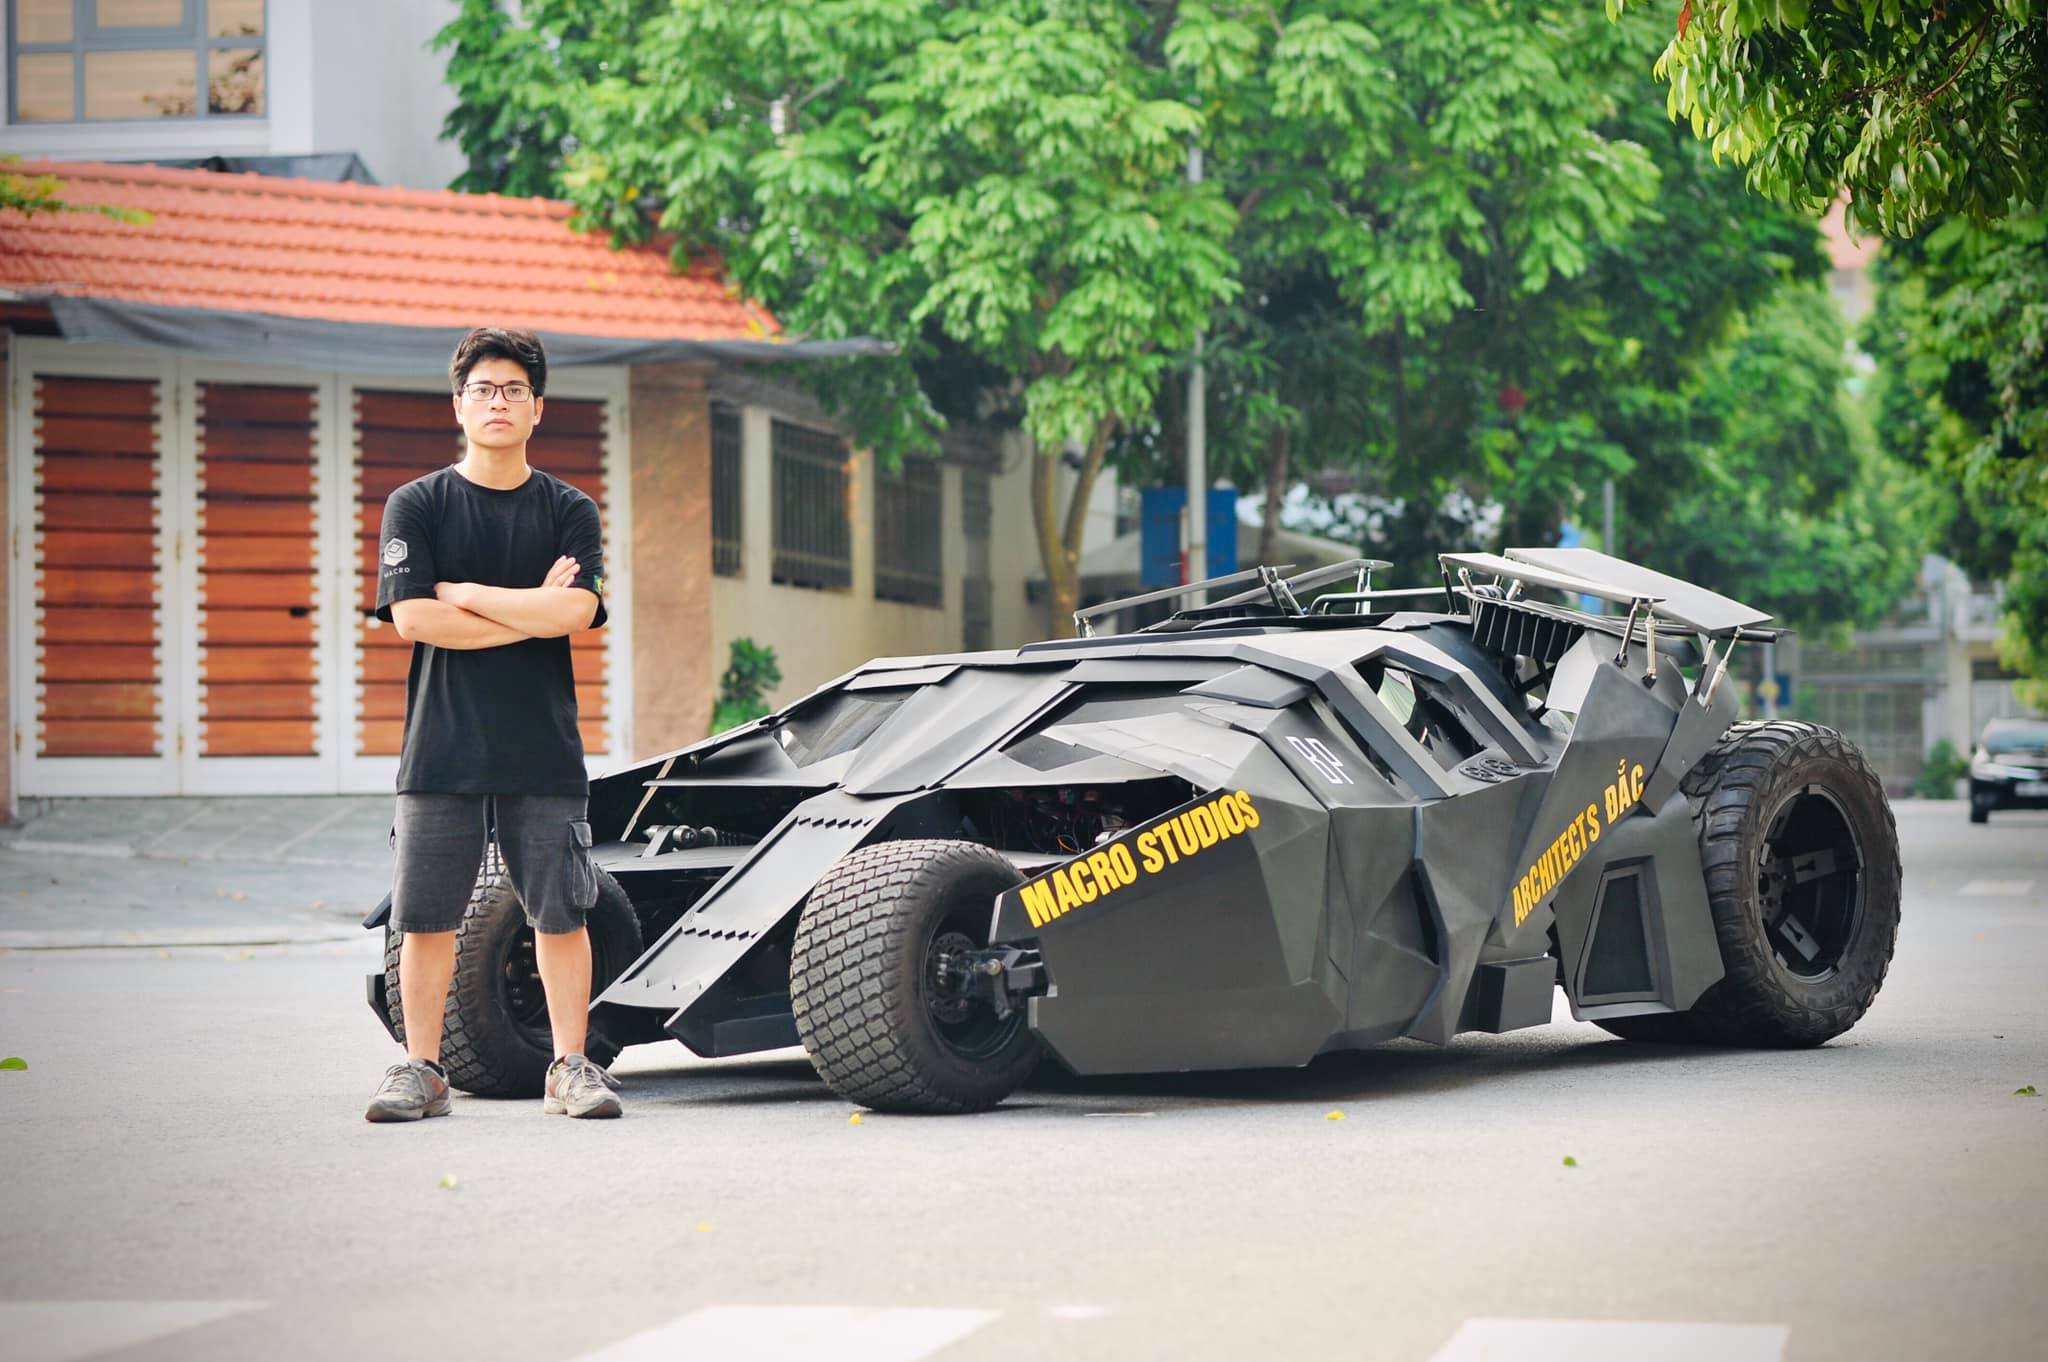 Batman Fan Builds Himself a Fully-Functional, Awesome Tumbler in 10 Months  - autoevolution